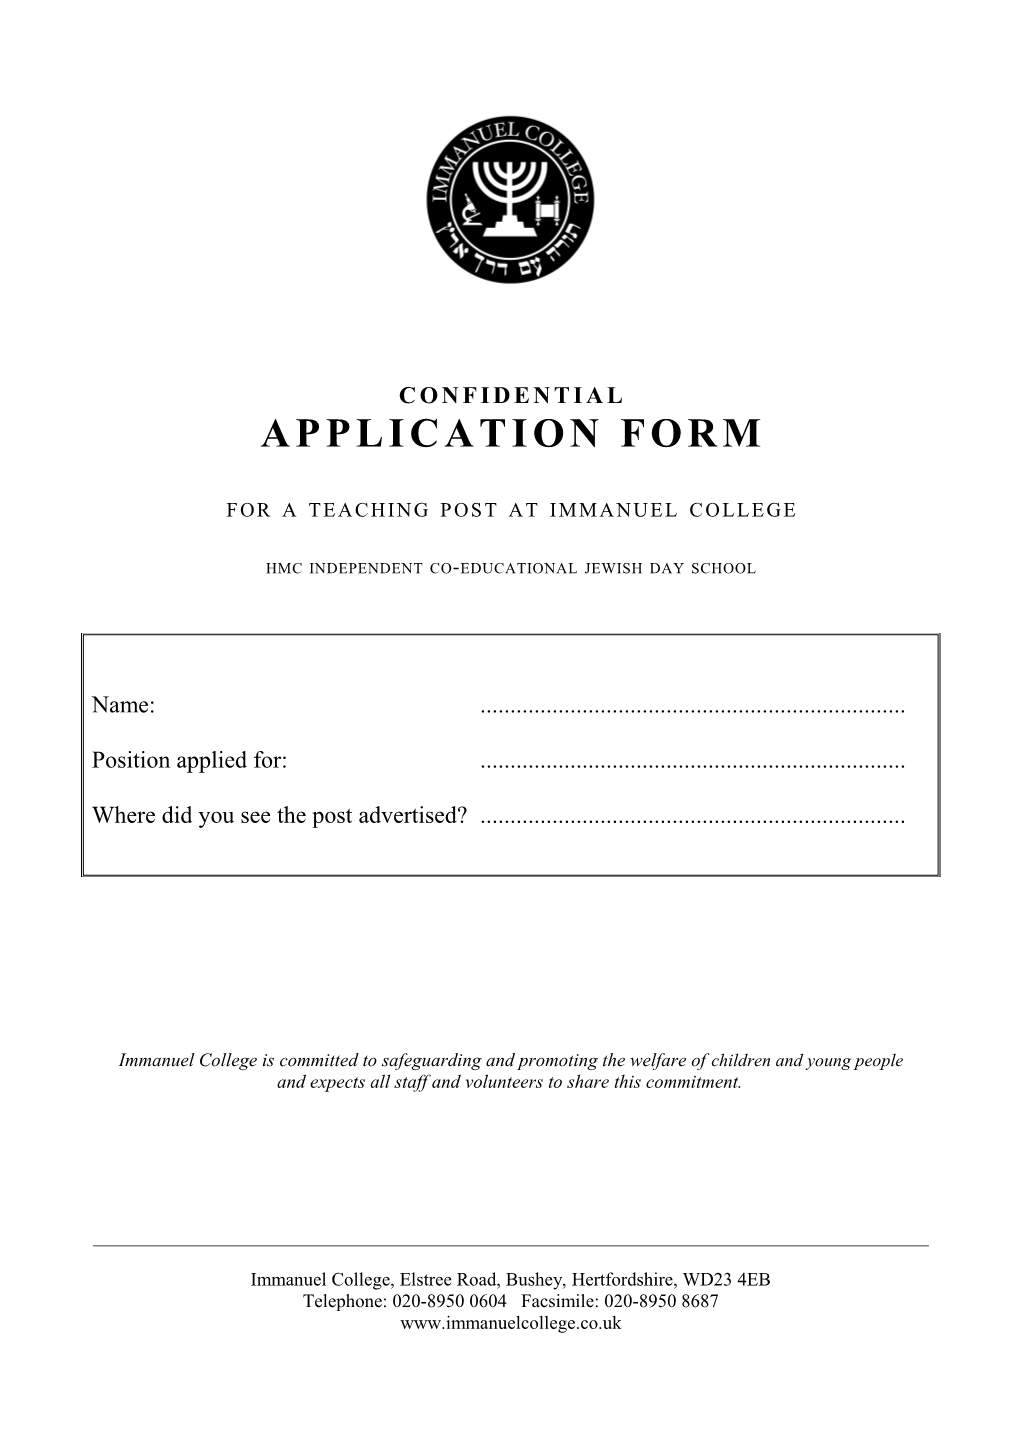 Application Form s54